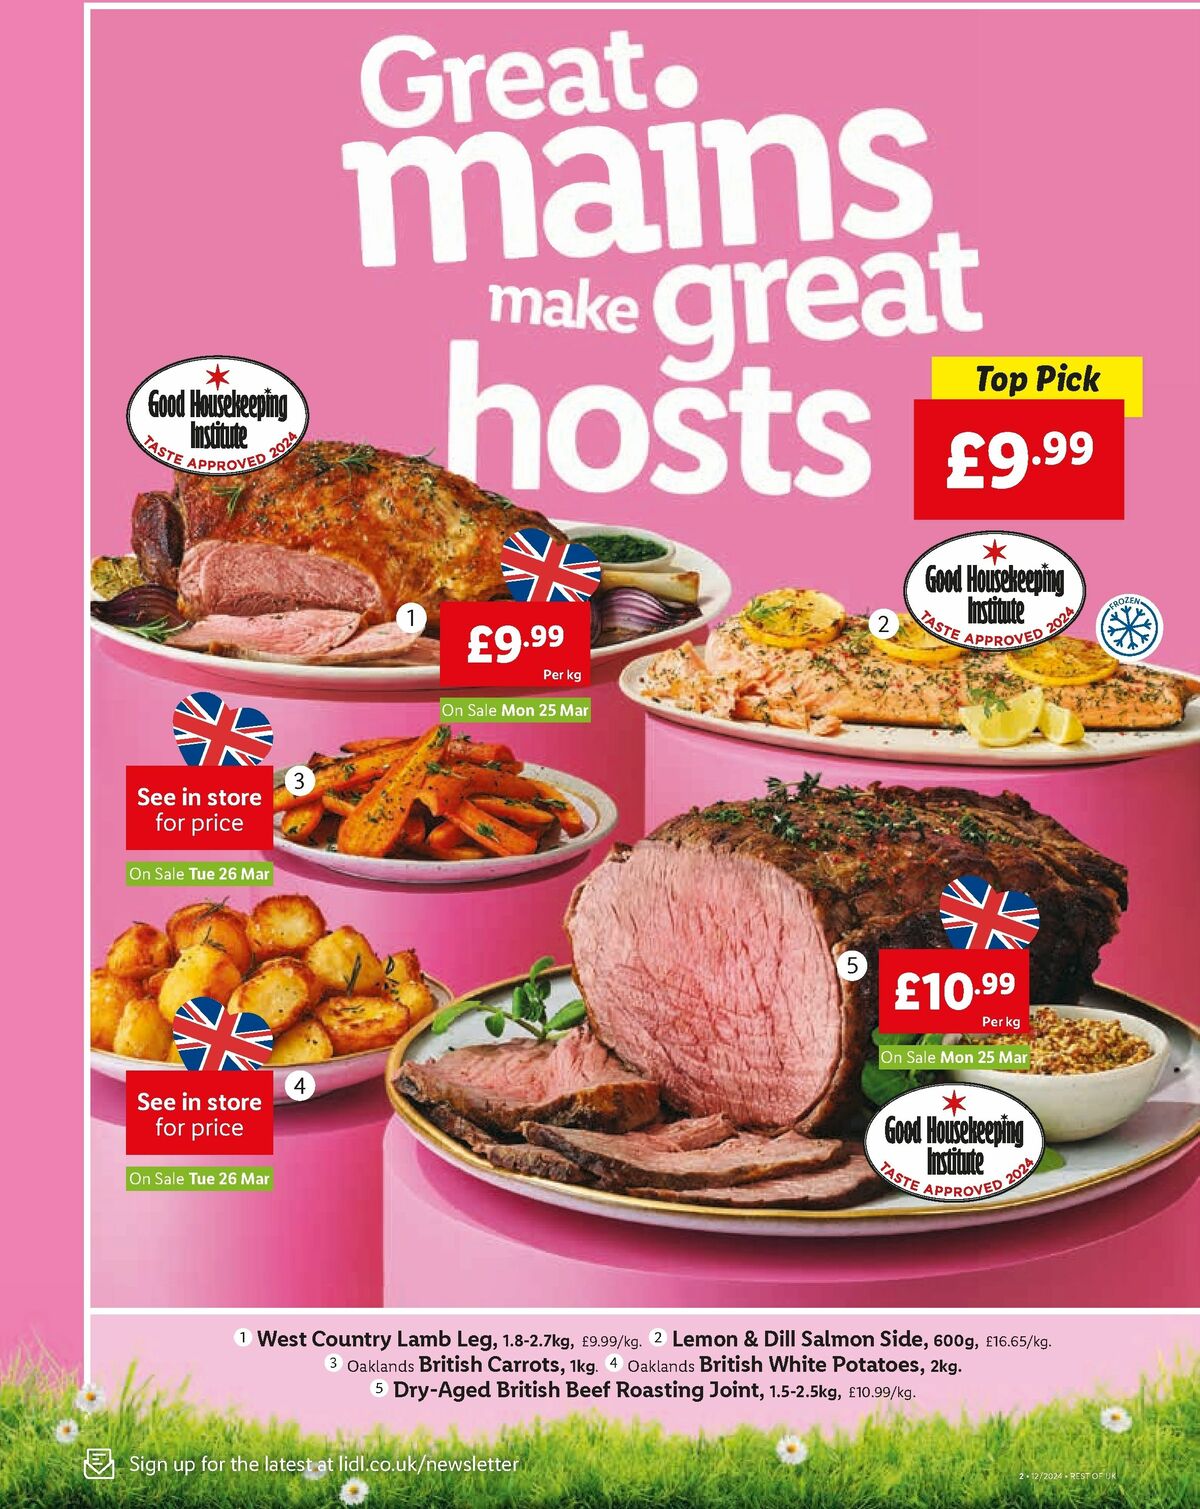 LIDL Offers from 21 March